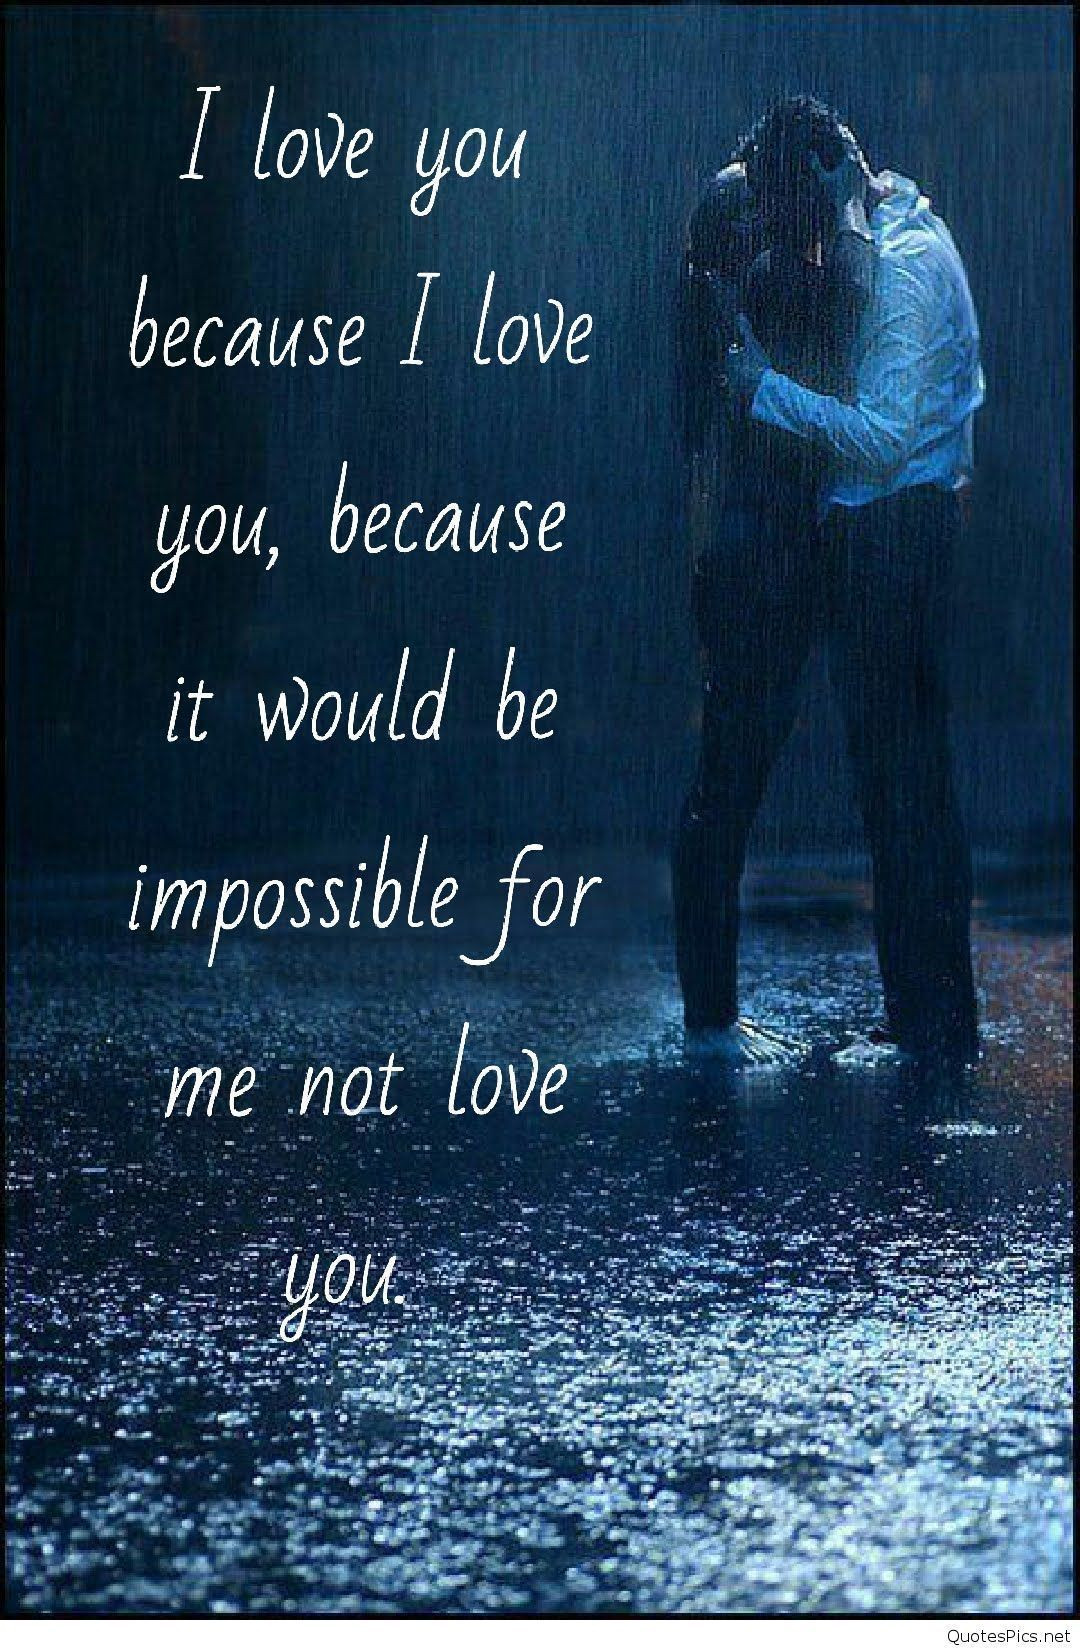 Romantic Rain Quote
 All Time Best 30 of Love Couples in Rain with Quotes